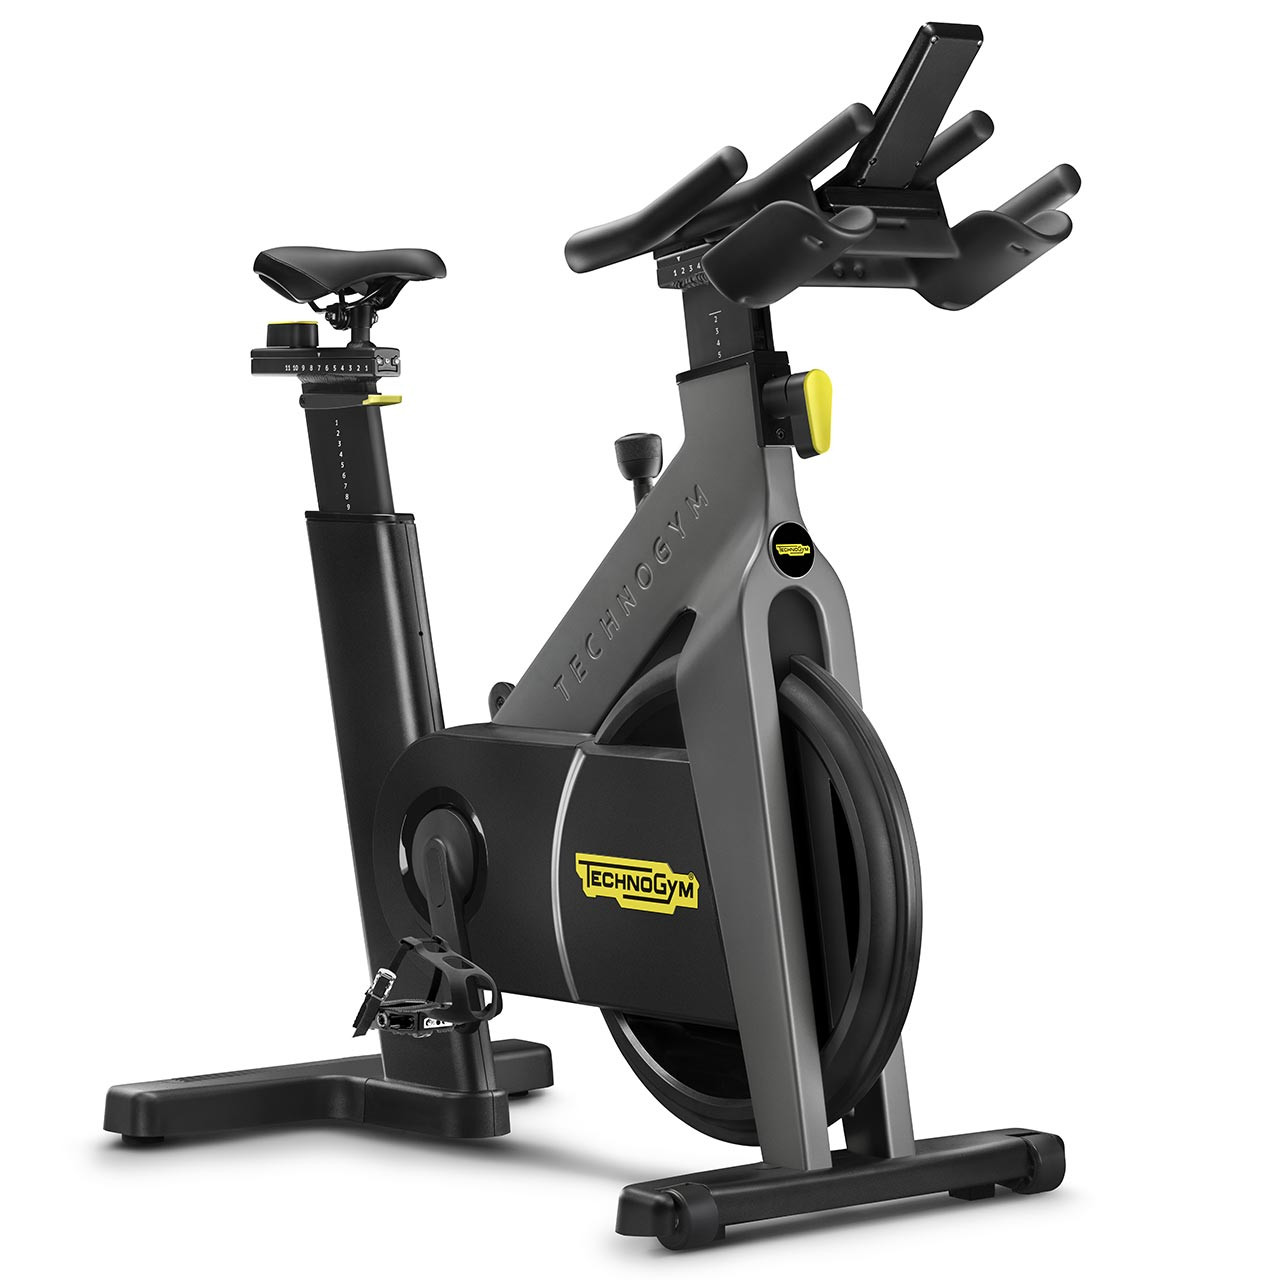 Group Cycle Connect -Technogym Group Cycle